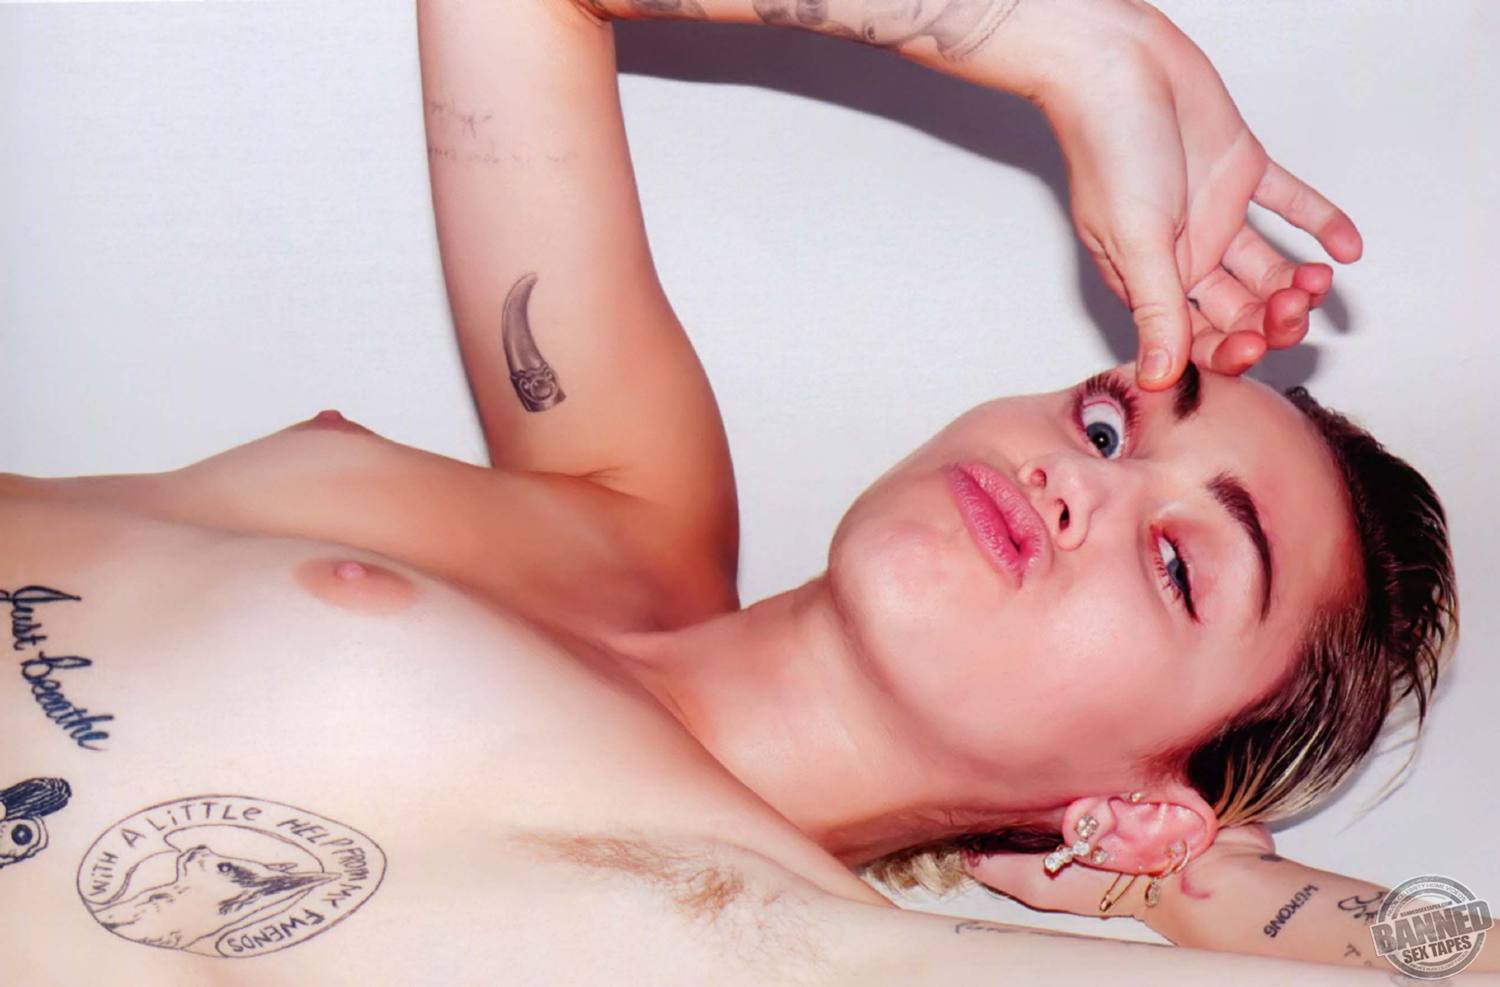 Miley Cyrus fully naked at Largest Celebrities Archive! 